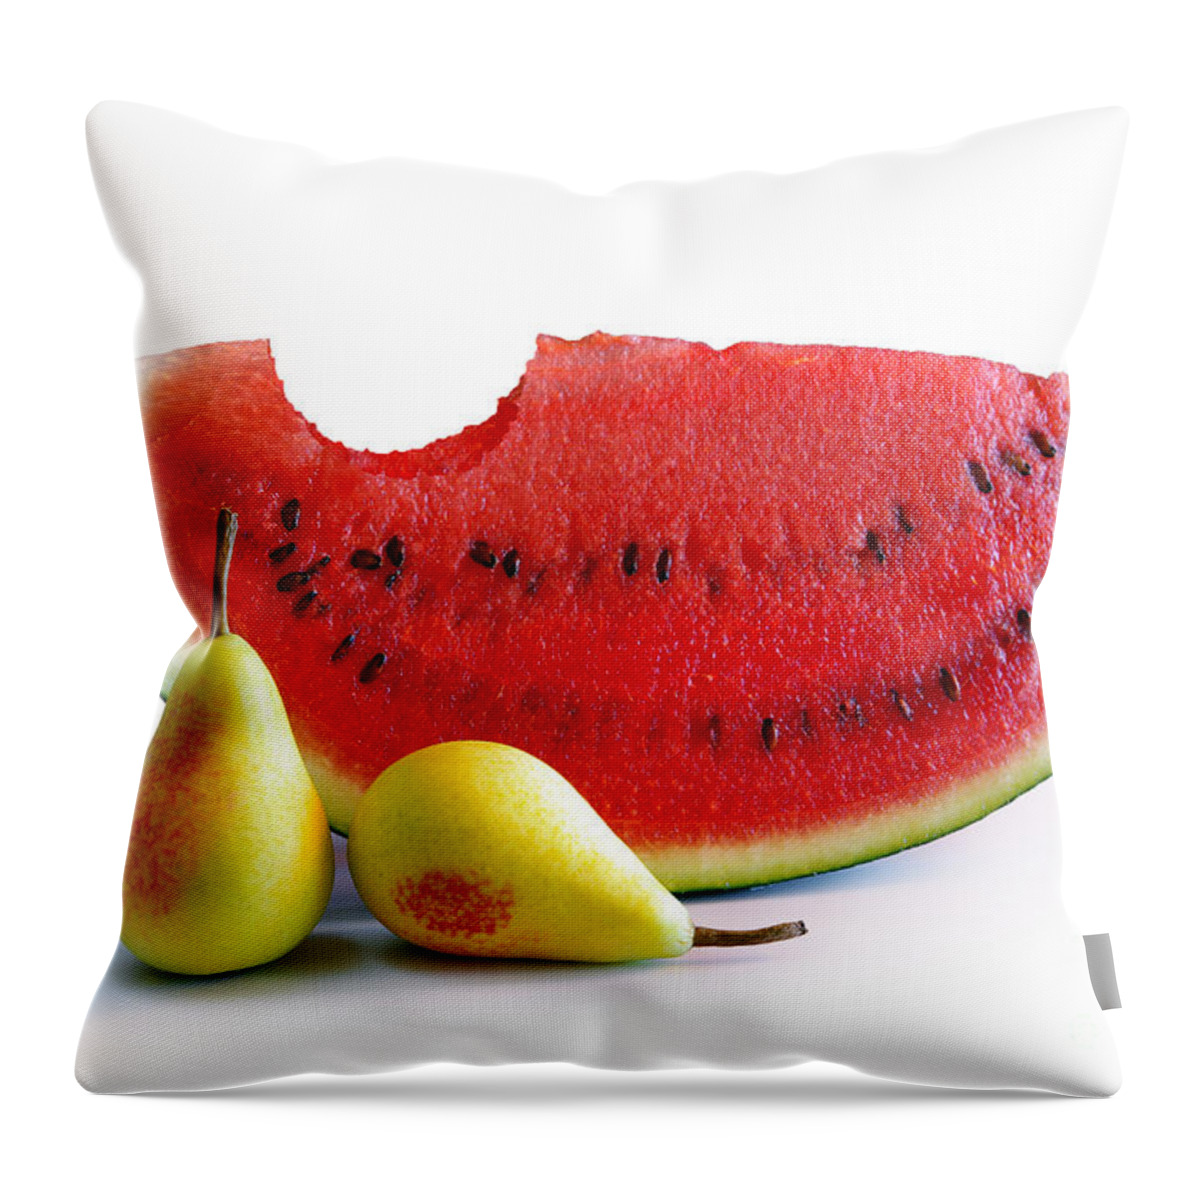 Arrangement Throw Pillow featuring the photograph Watermelon and Pears by Carlos Caetano